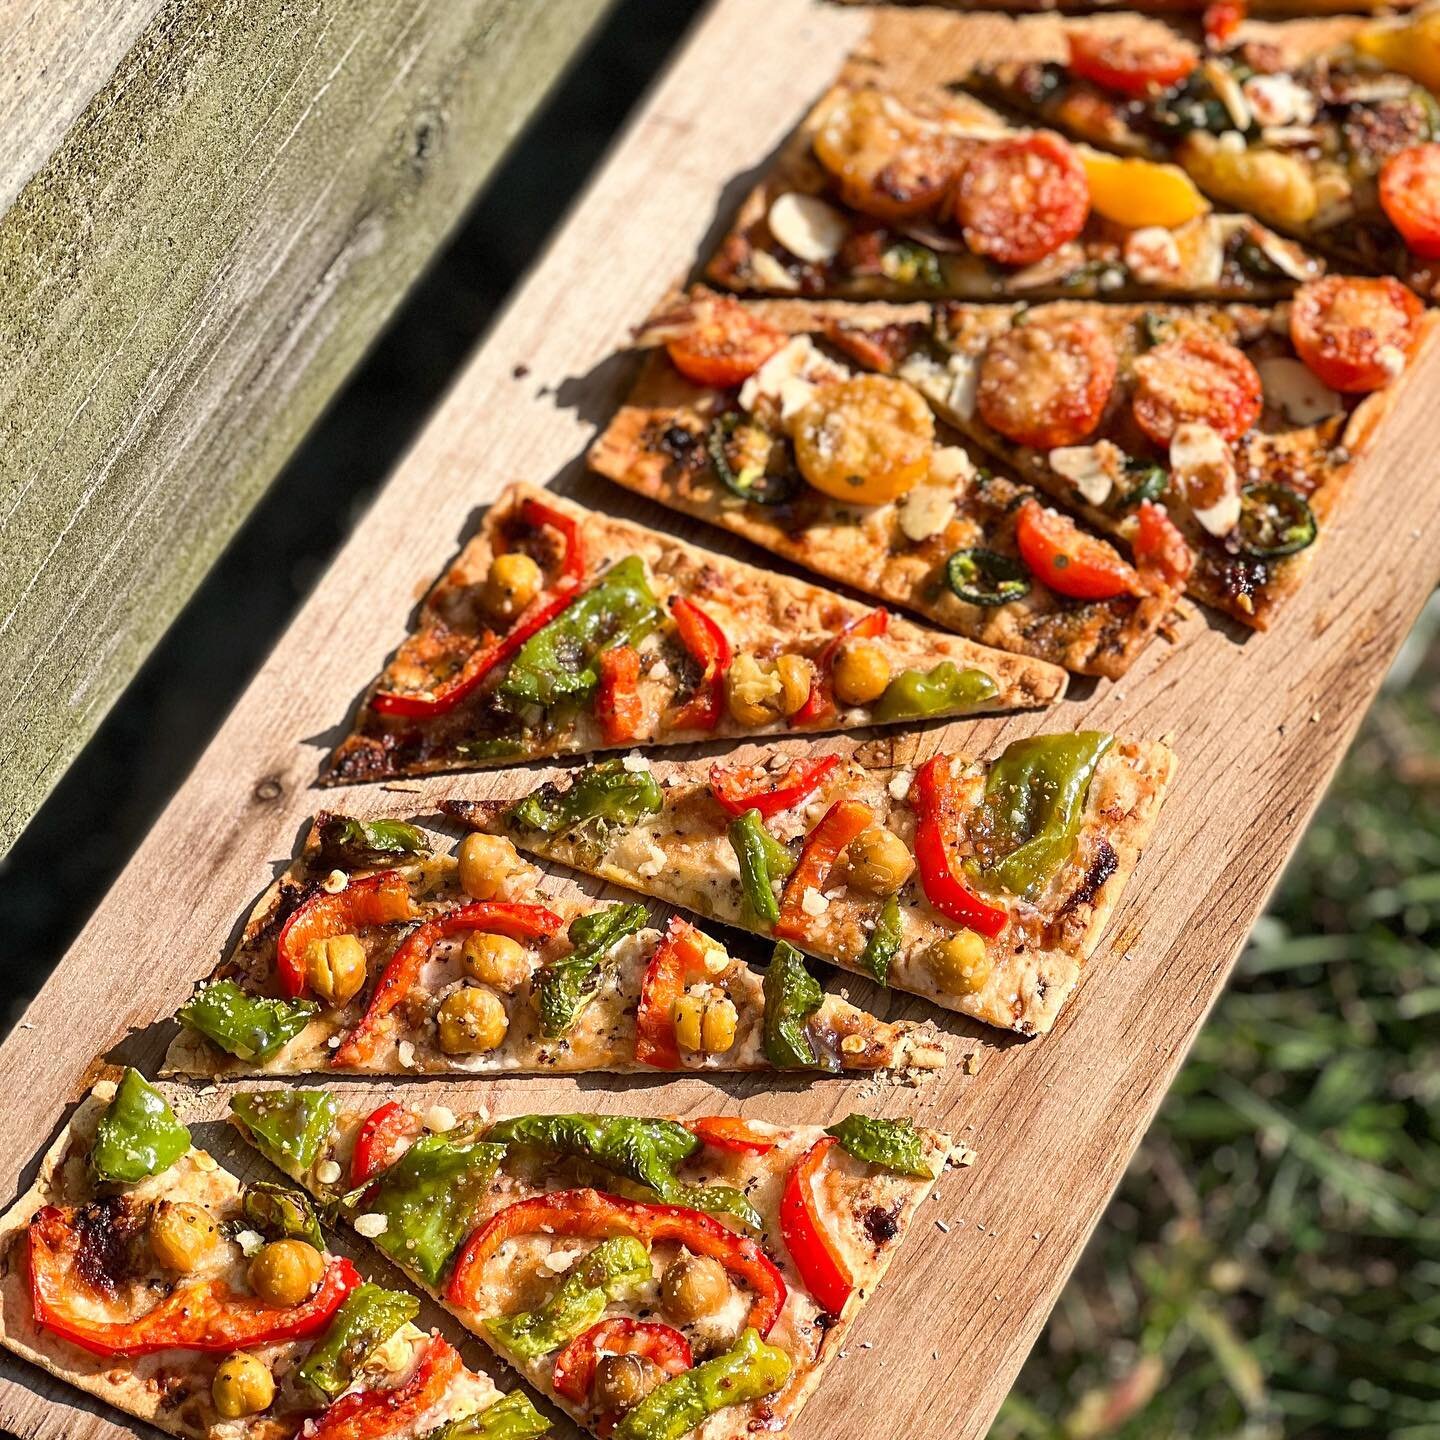 This week I was able to get super creative with @atoriasfamilybakery Flatbreads and Lavash! I created 5 delicious recipes that are snacking pizzas to share with friends! These 2 pizzas were made on the Flatbreads, and I will be sharing the recipes so